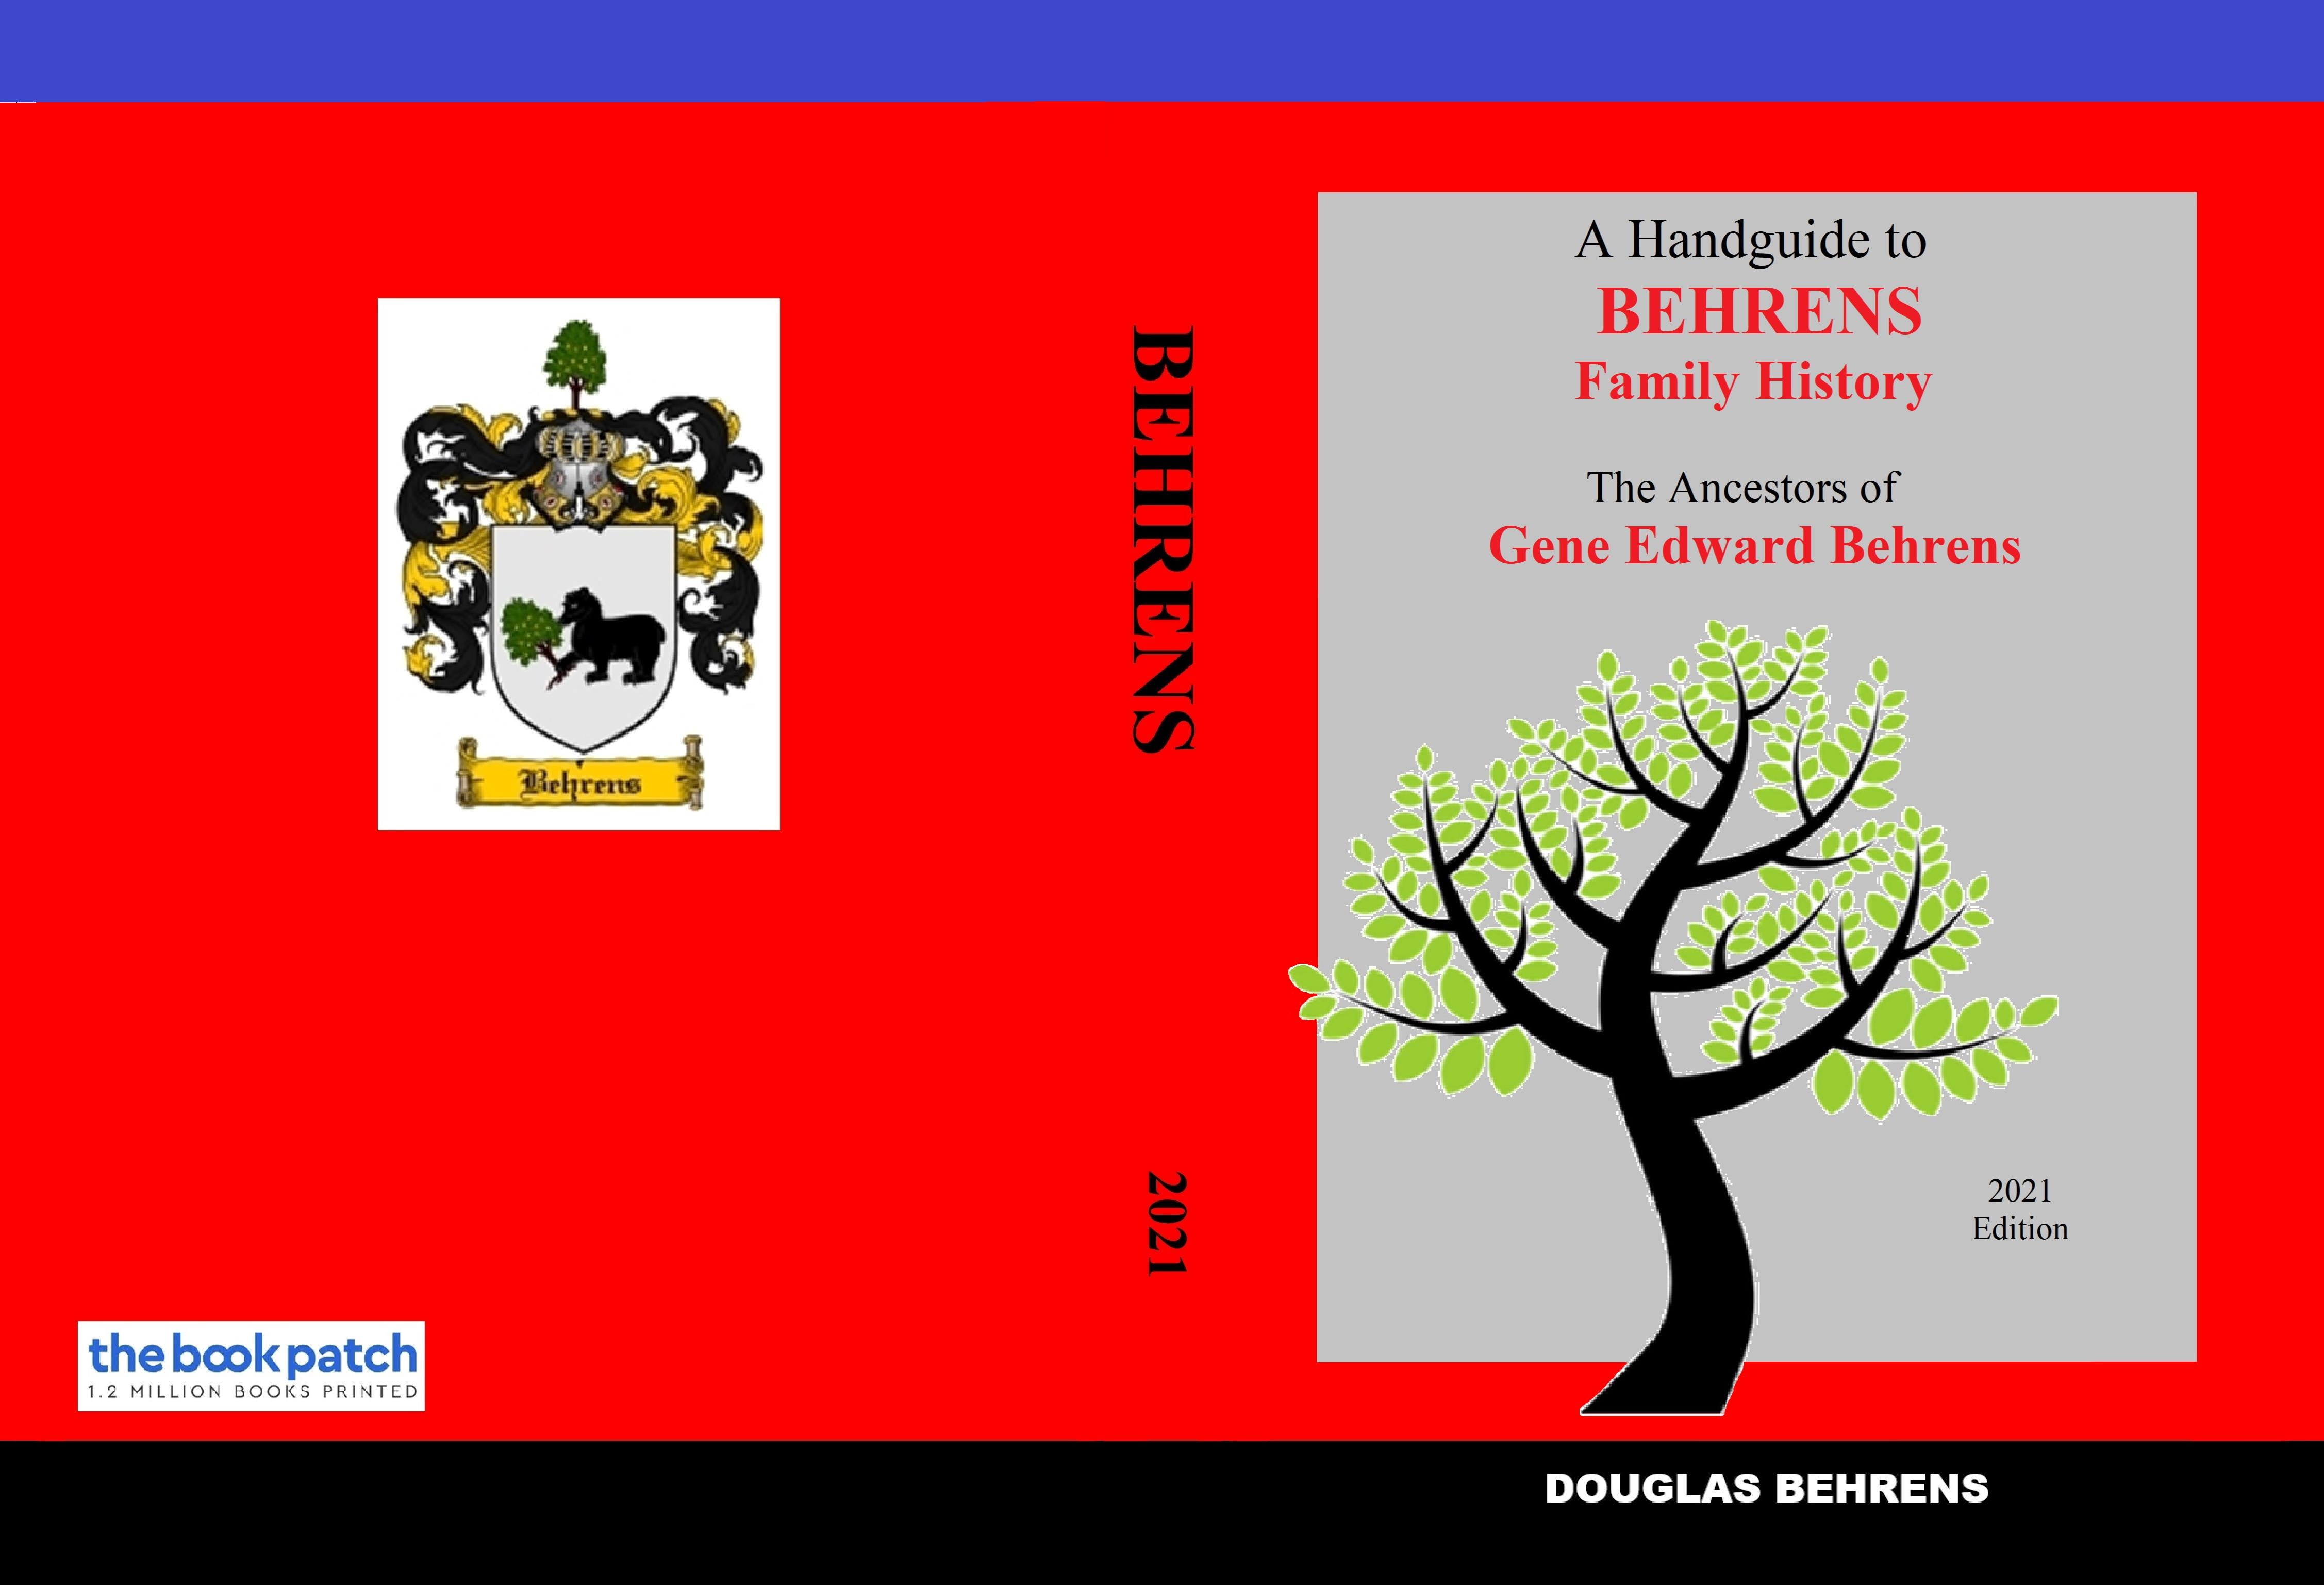  A Handguide to Behrens Family History cover image